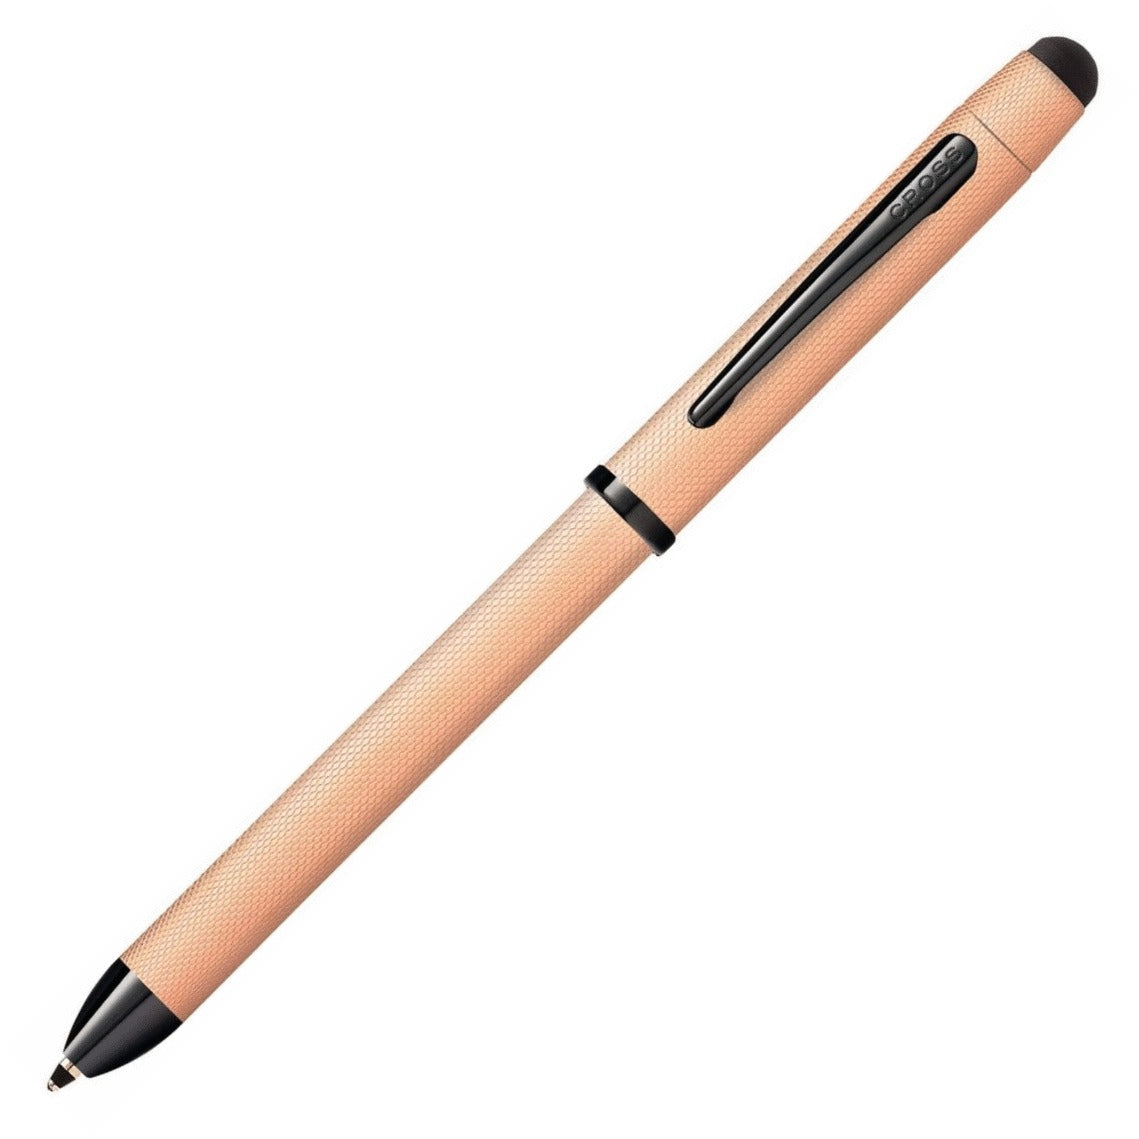 Cross Tech3 Brushed Rose Gold PVD MultiFunction Pen | AT0090-20 | Pen Place